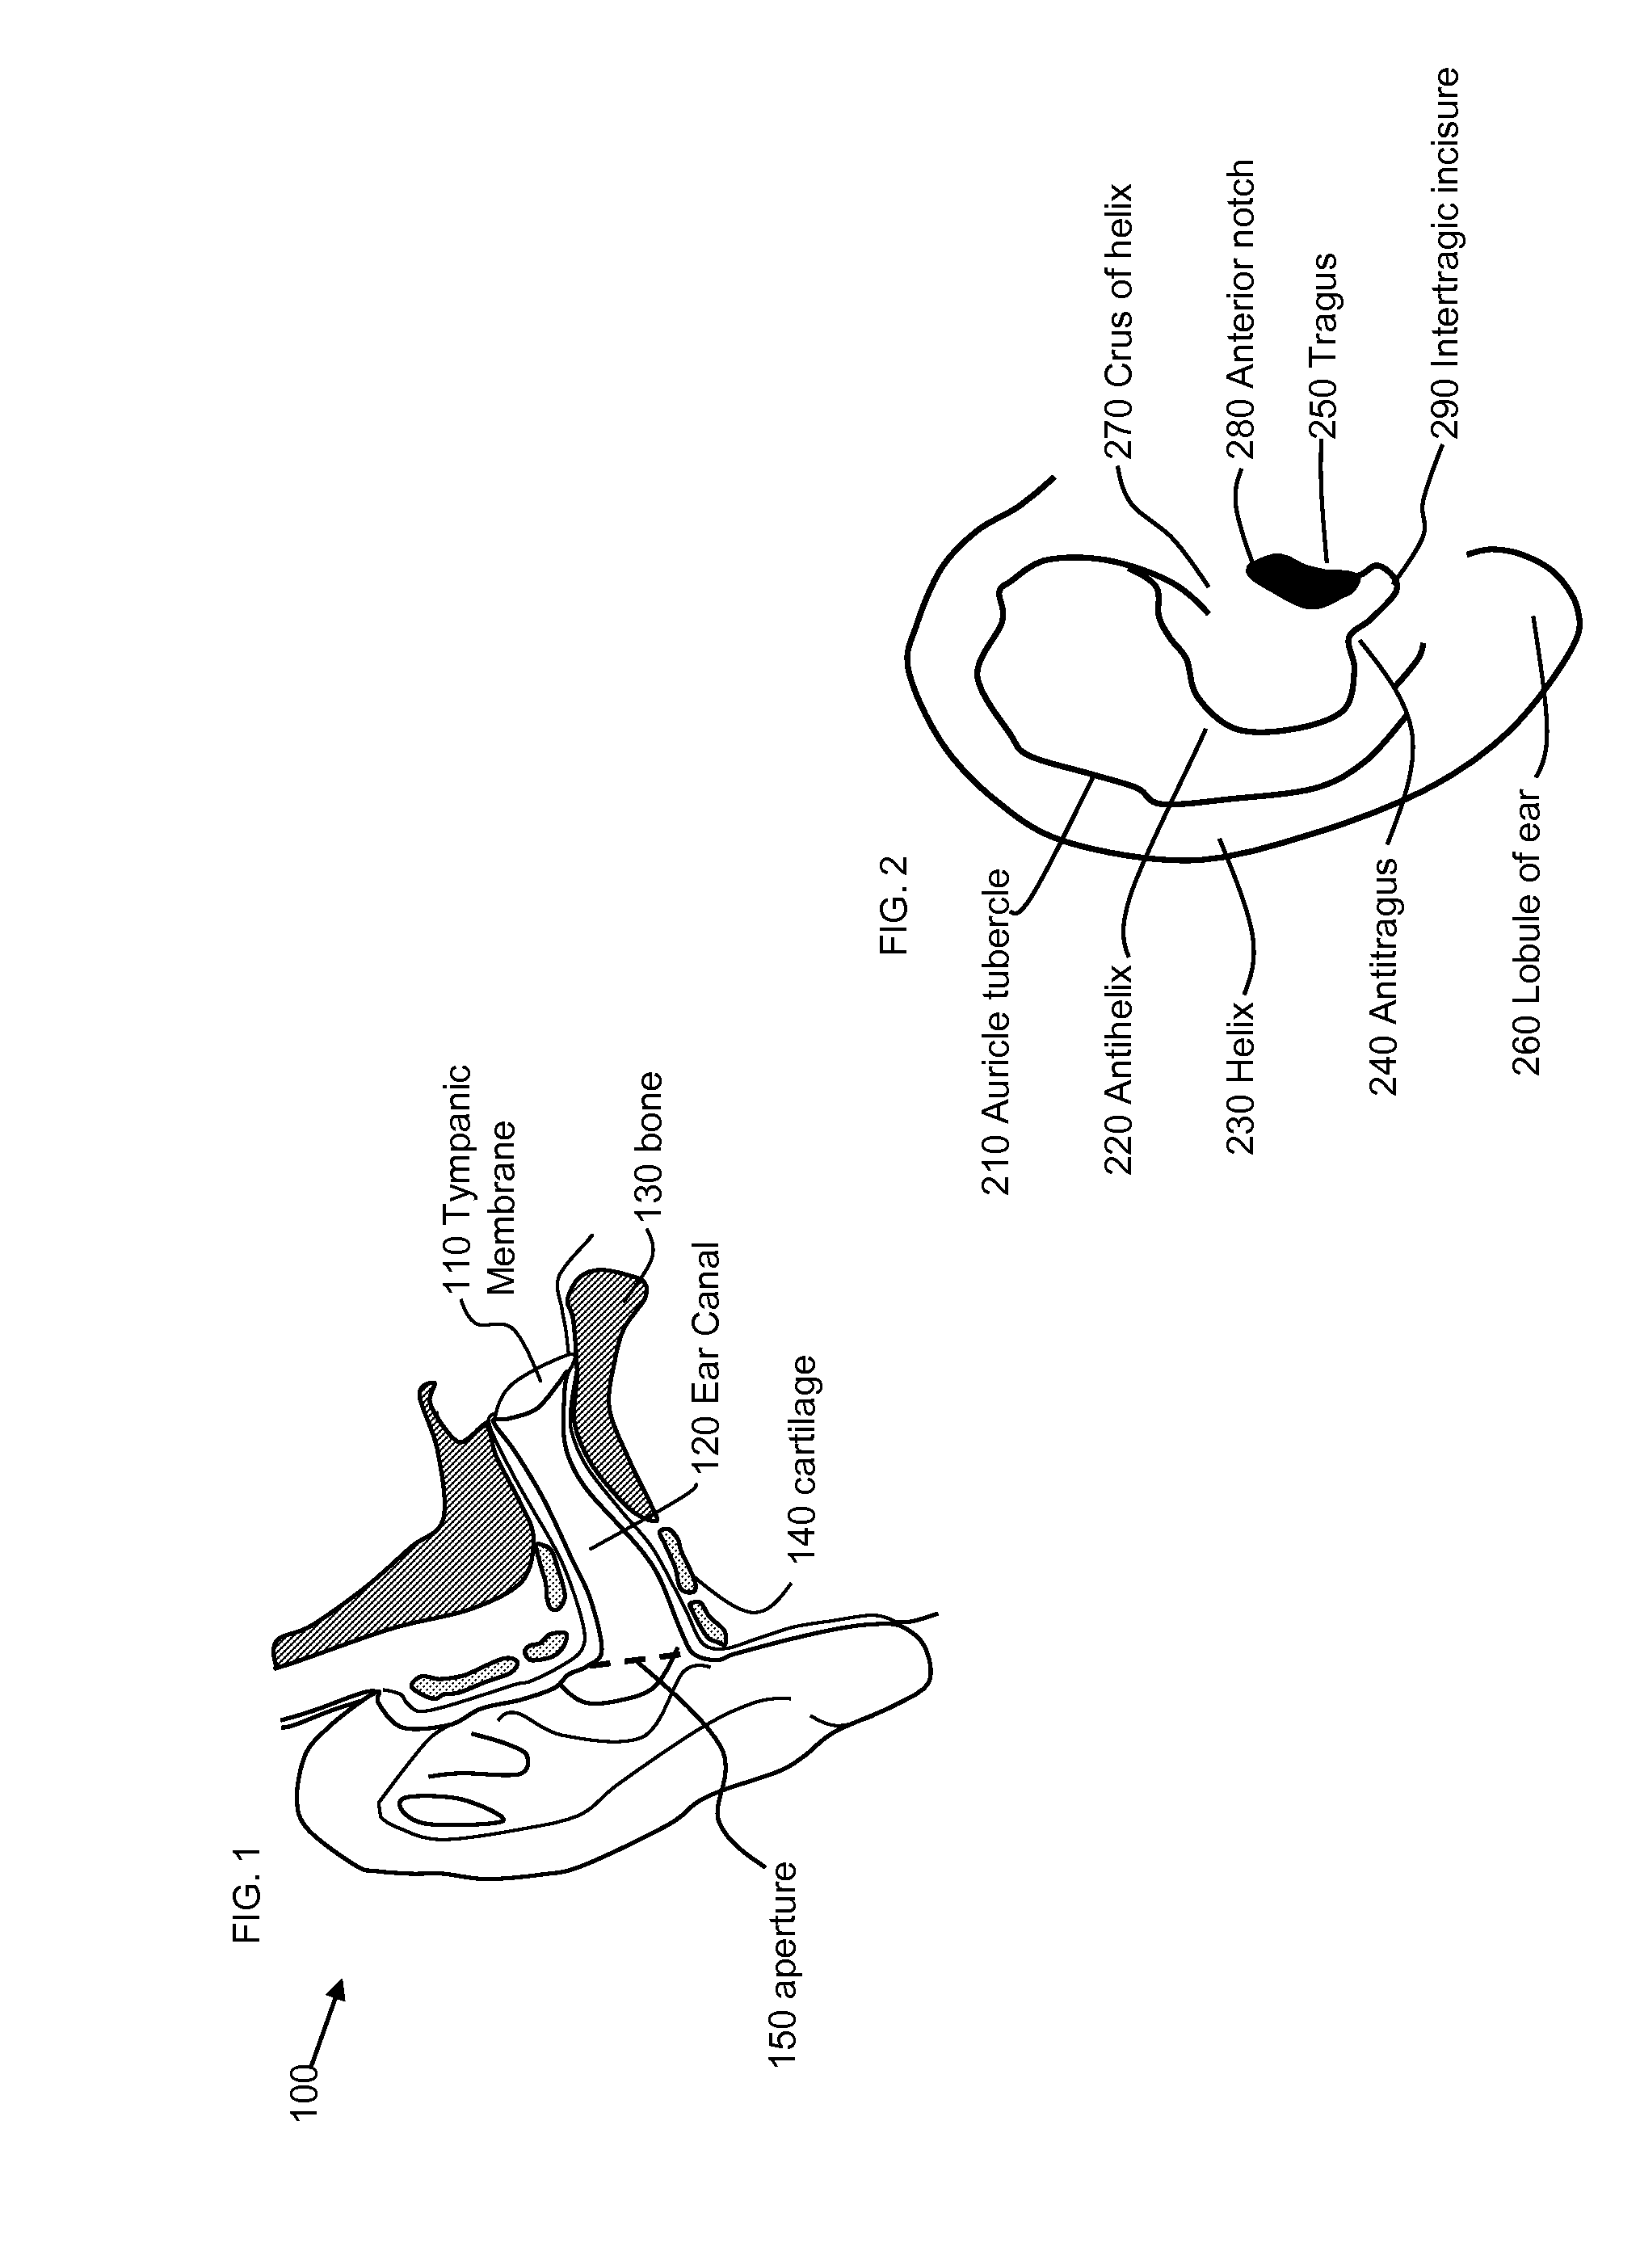 Method and structure for achieveing acoustically spectrum tunable earpieces, panels, and inserts